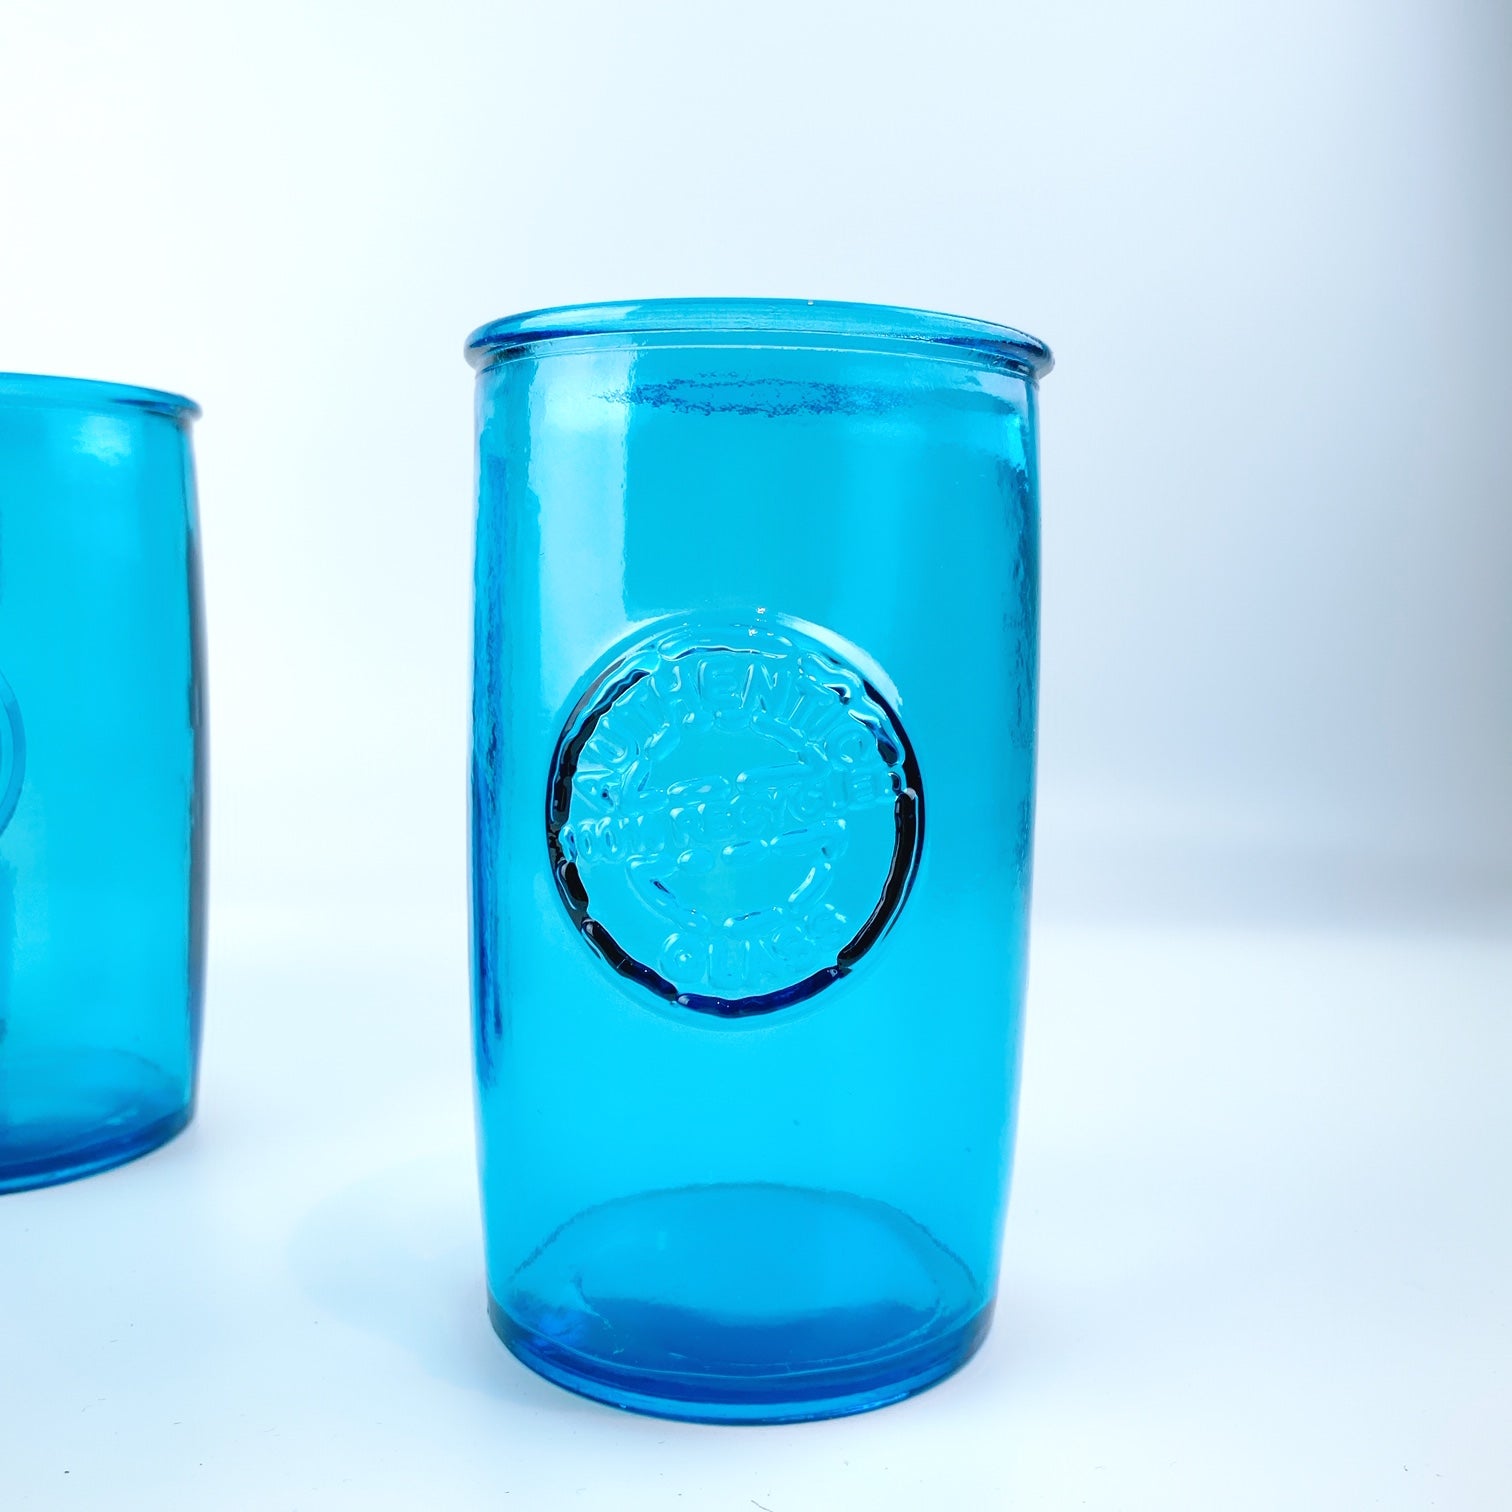 11 Best Recycled Glassware Brands To Sip On In 2023